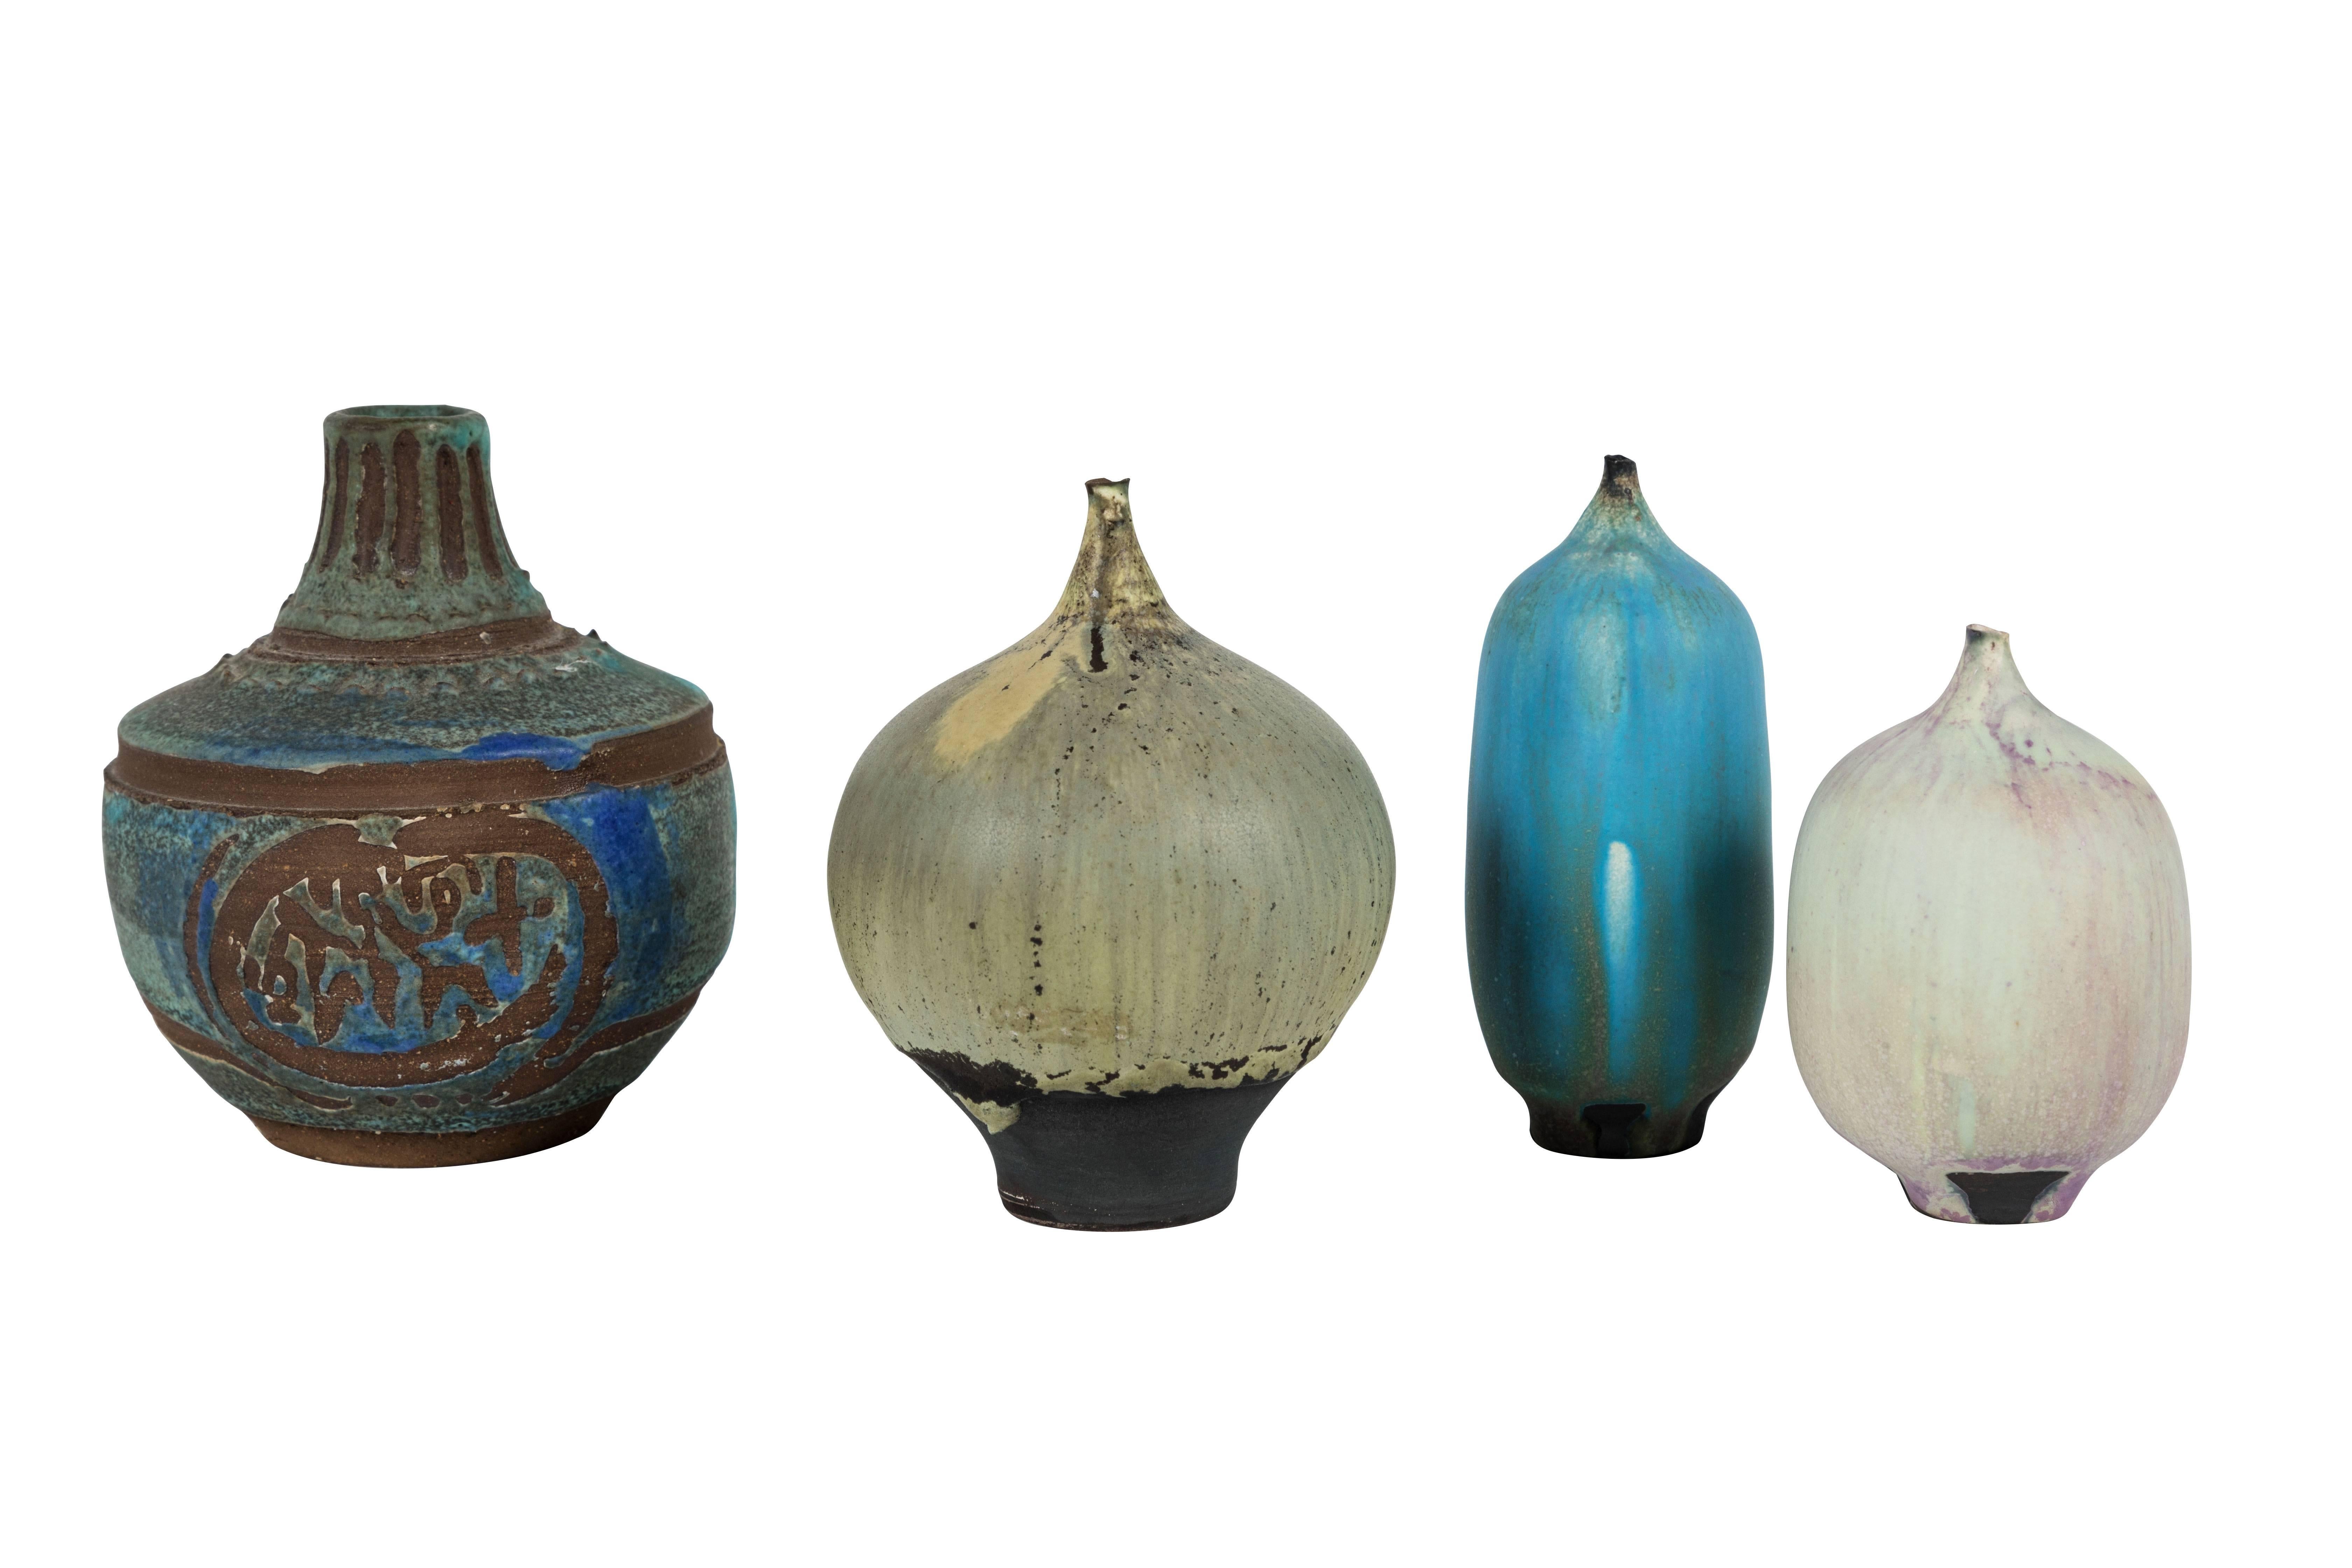 Assembled grouping of four 'Feelie' vases by Rose Cabat (1914-2015). Petite scale, beautiful, soft forms with Cabat's signature innovative glazes. Largest size listed for dimensions. Signed. Would consider breaking up set.